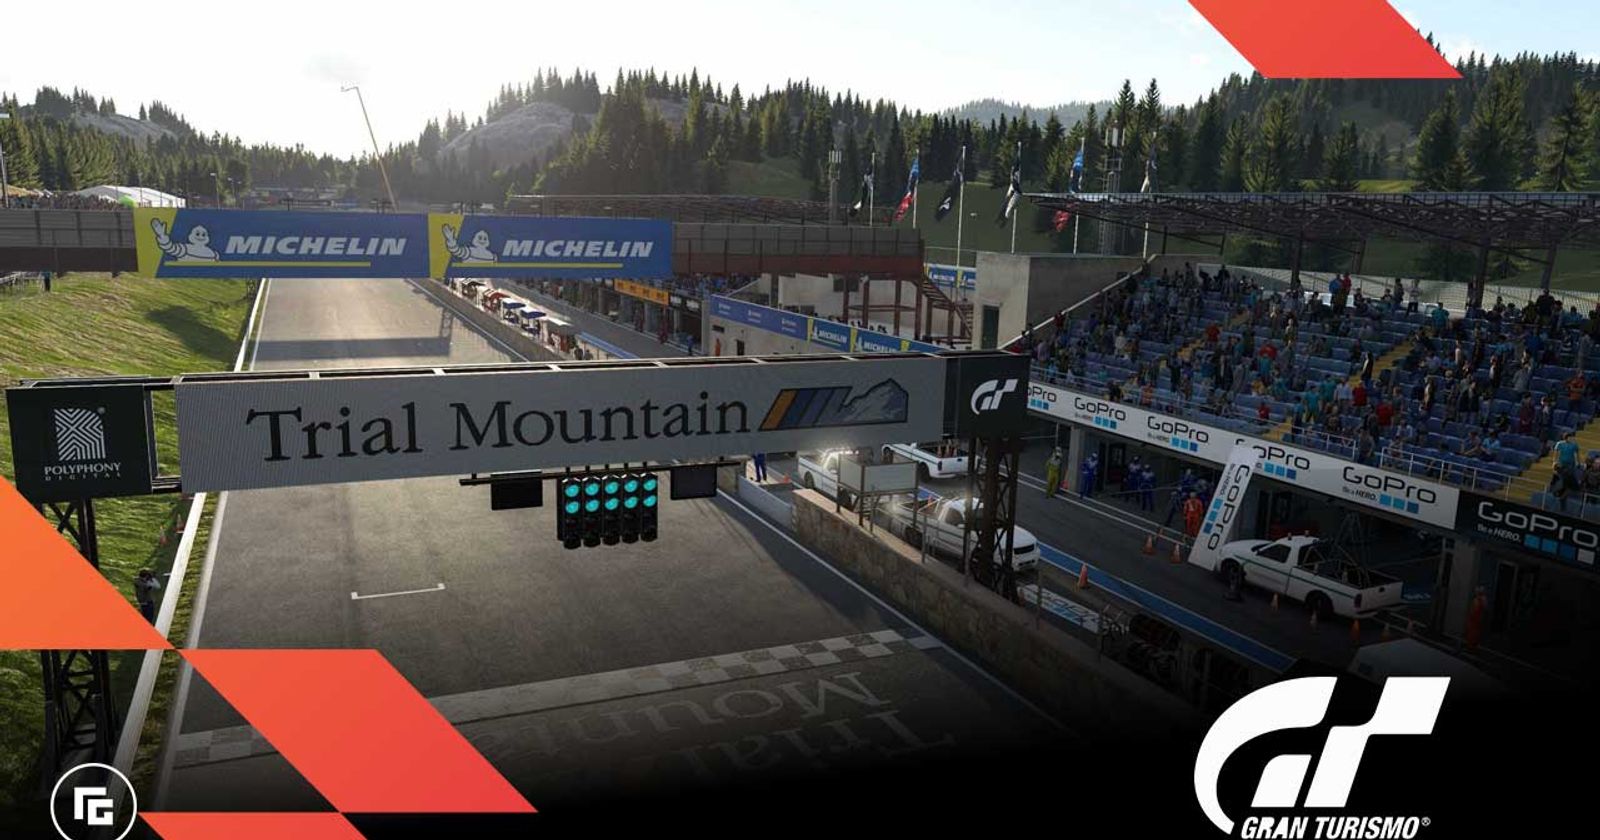 First look at Deep Forest Raceway in Gran Turismo 7 (PS5 Gameplay